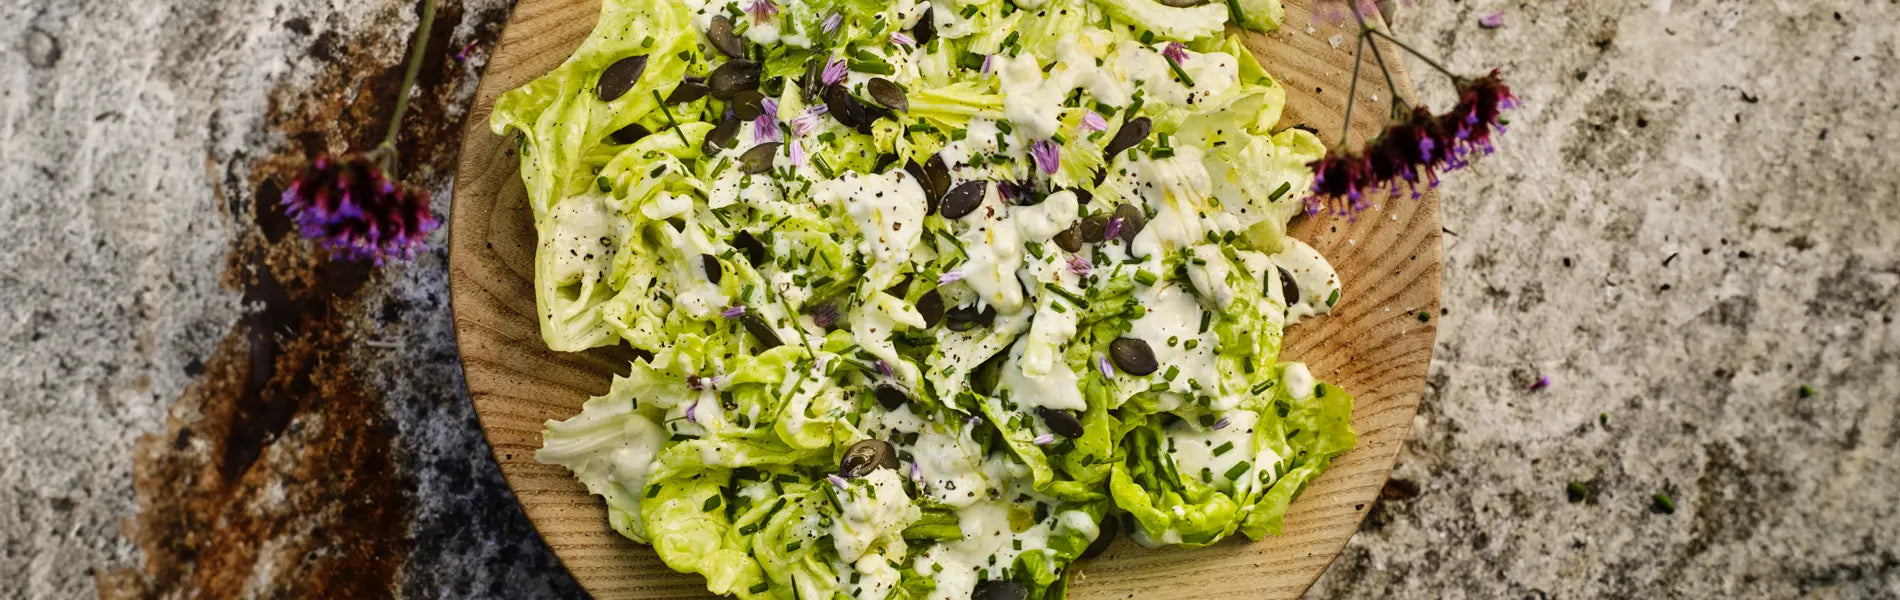 Gill's Lettuce And Celery Salad With Blue Cheese Dressing